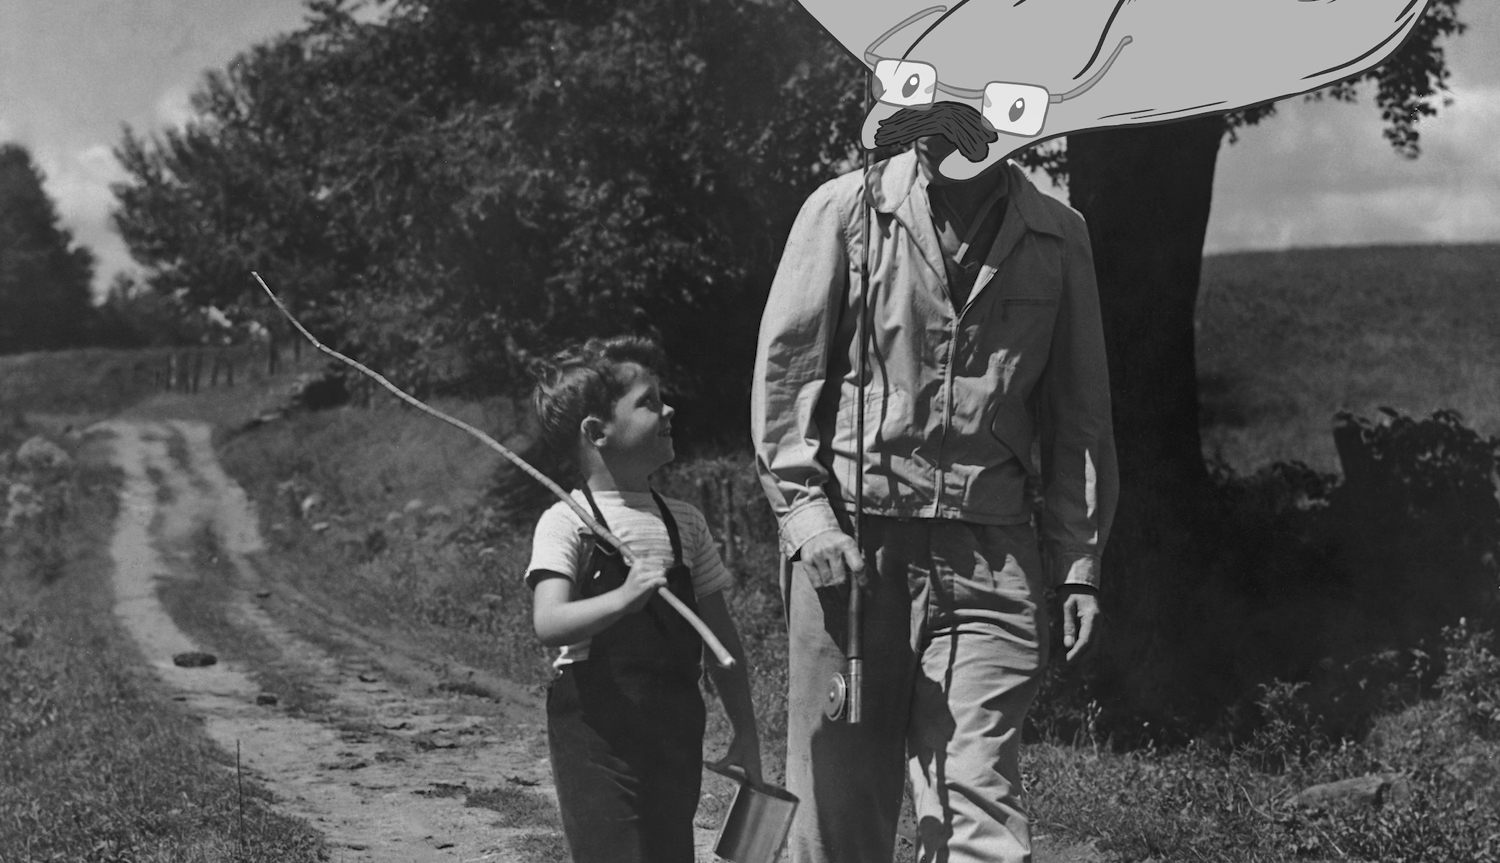 Father and son going on a fishing trip circa 1940's. (Photo by FPG/Getty Images)